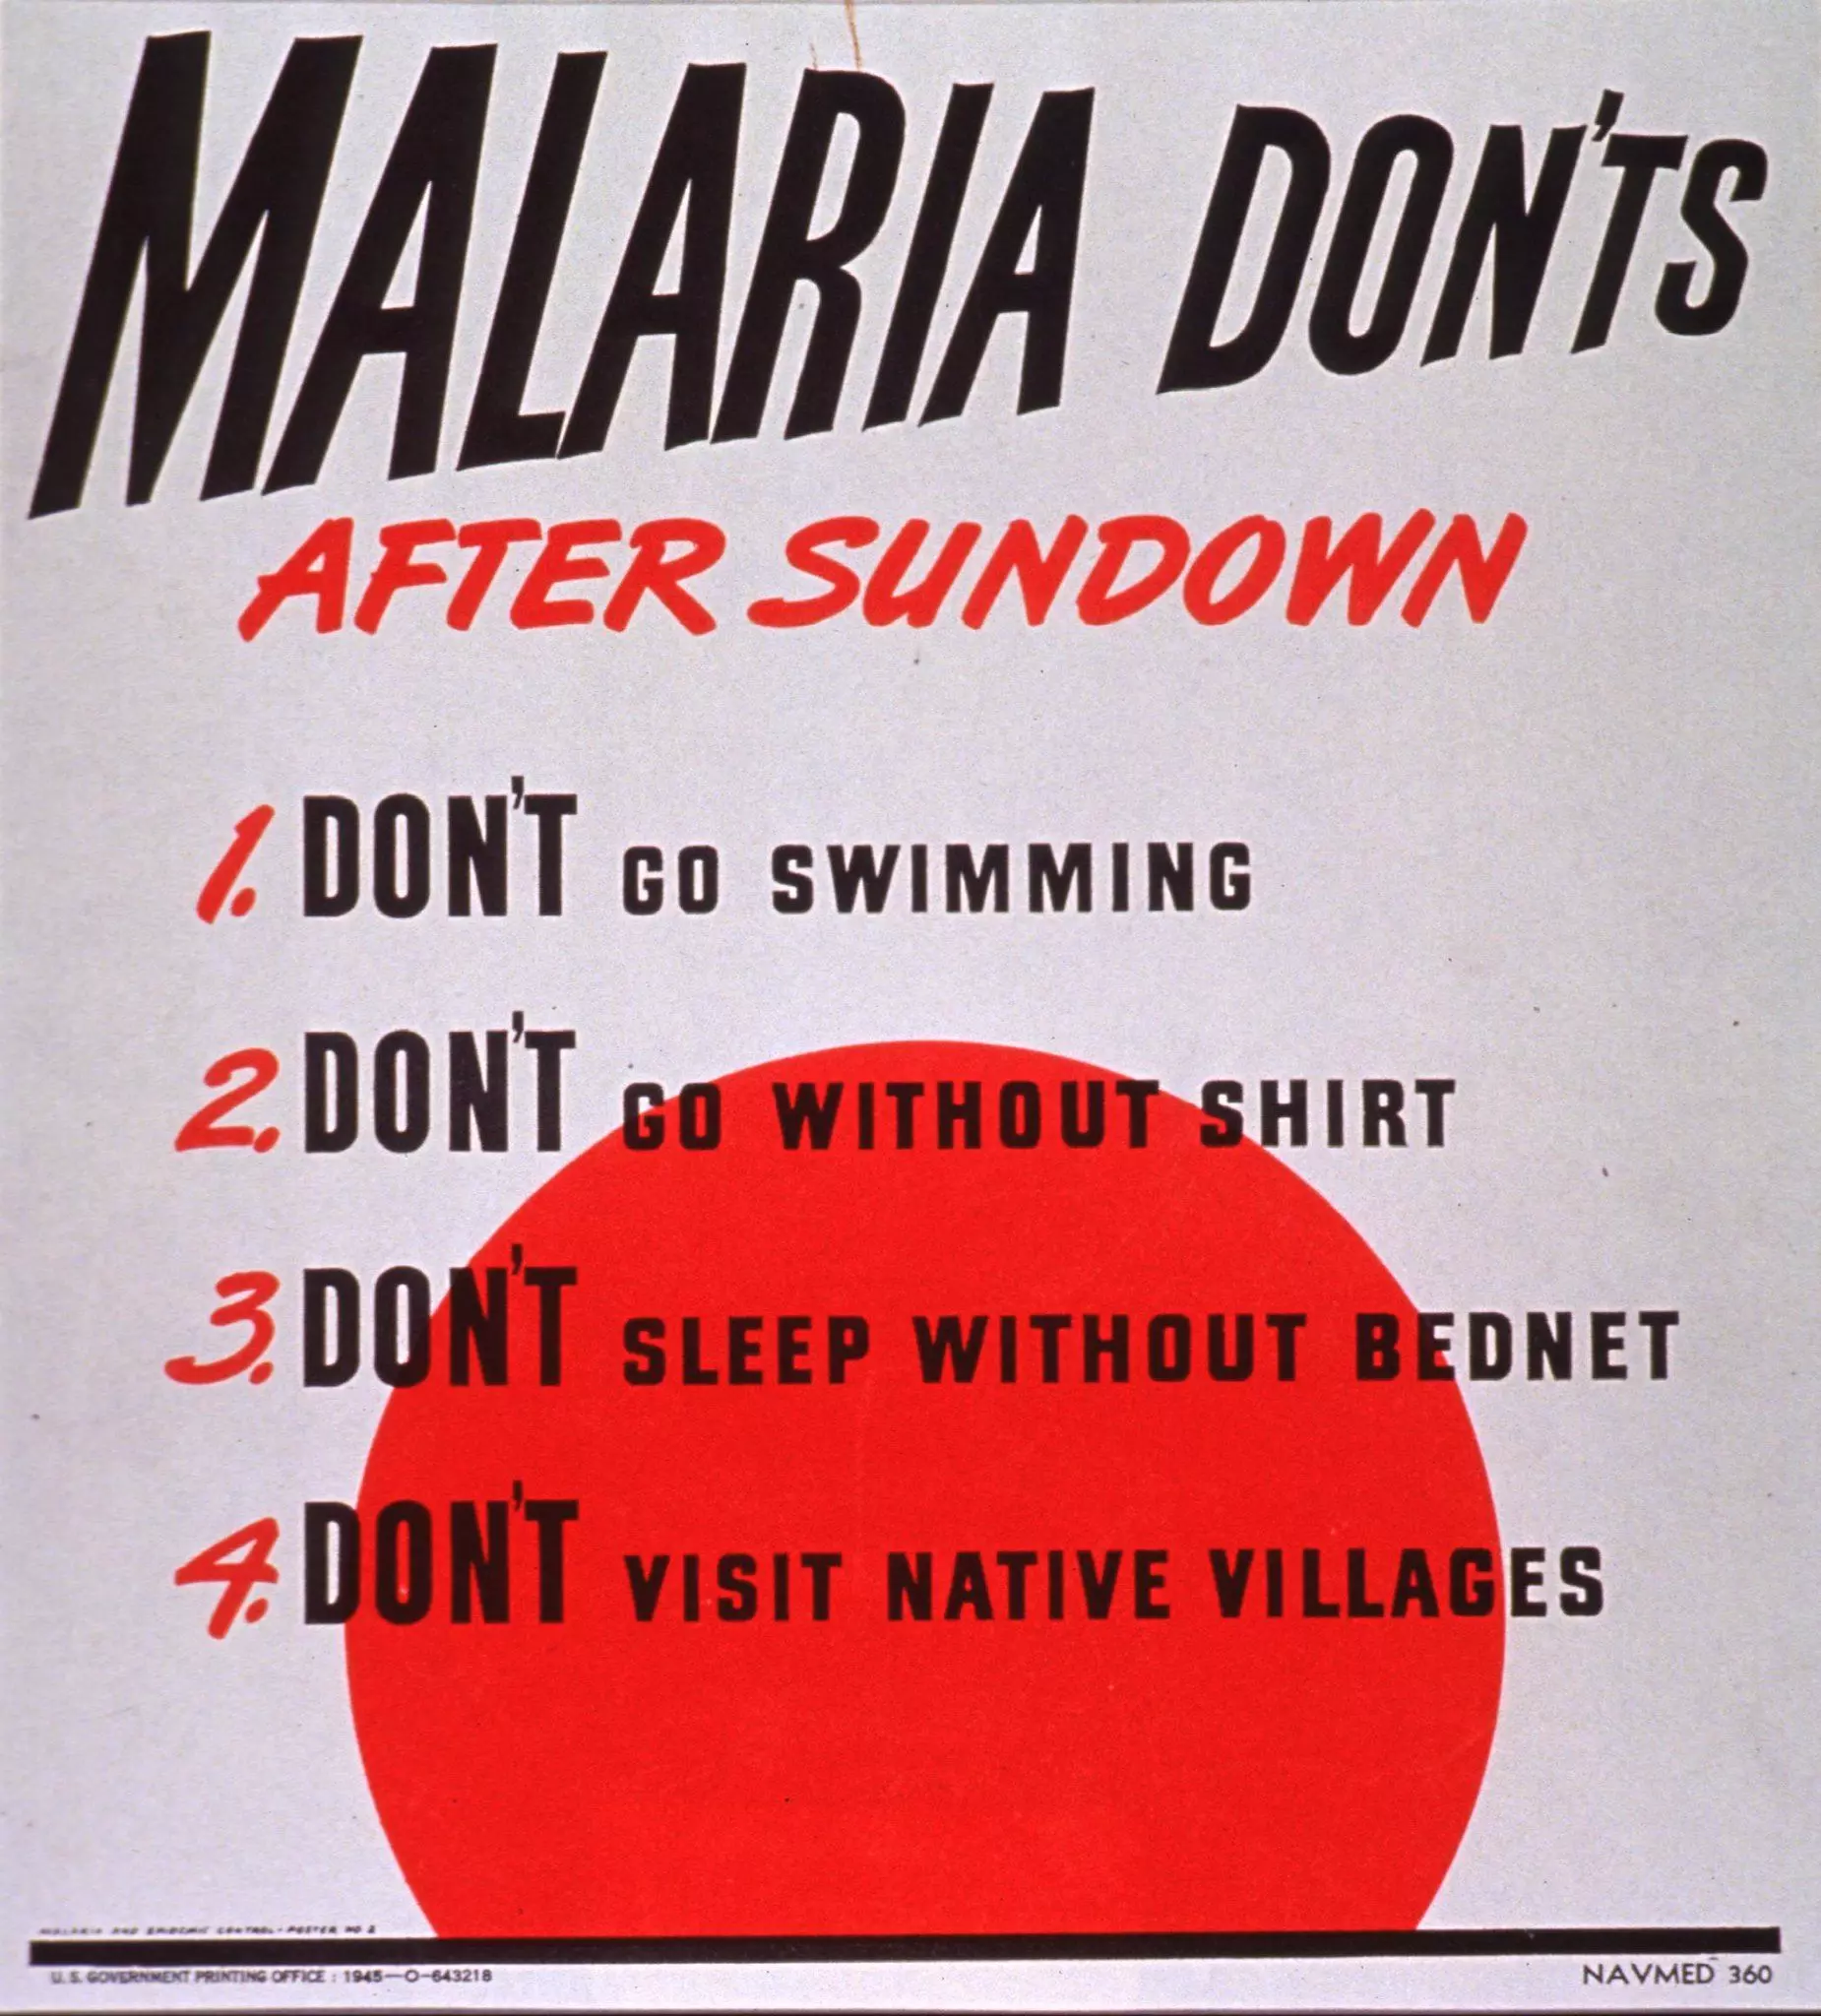 Malaria Donts SimpleMed